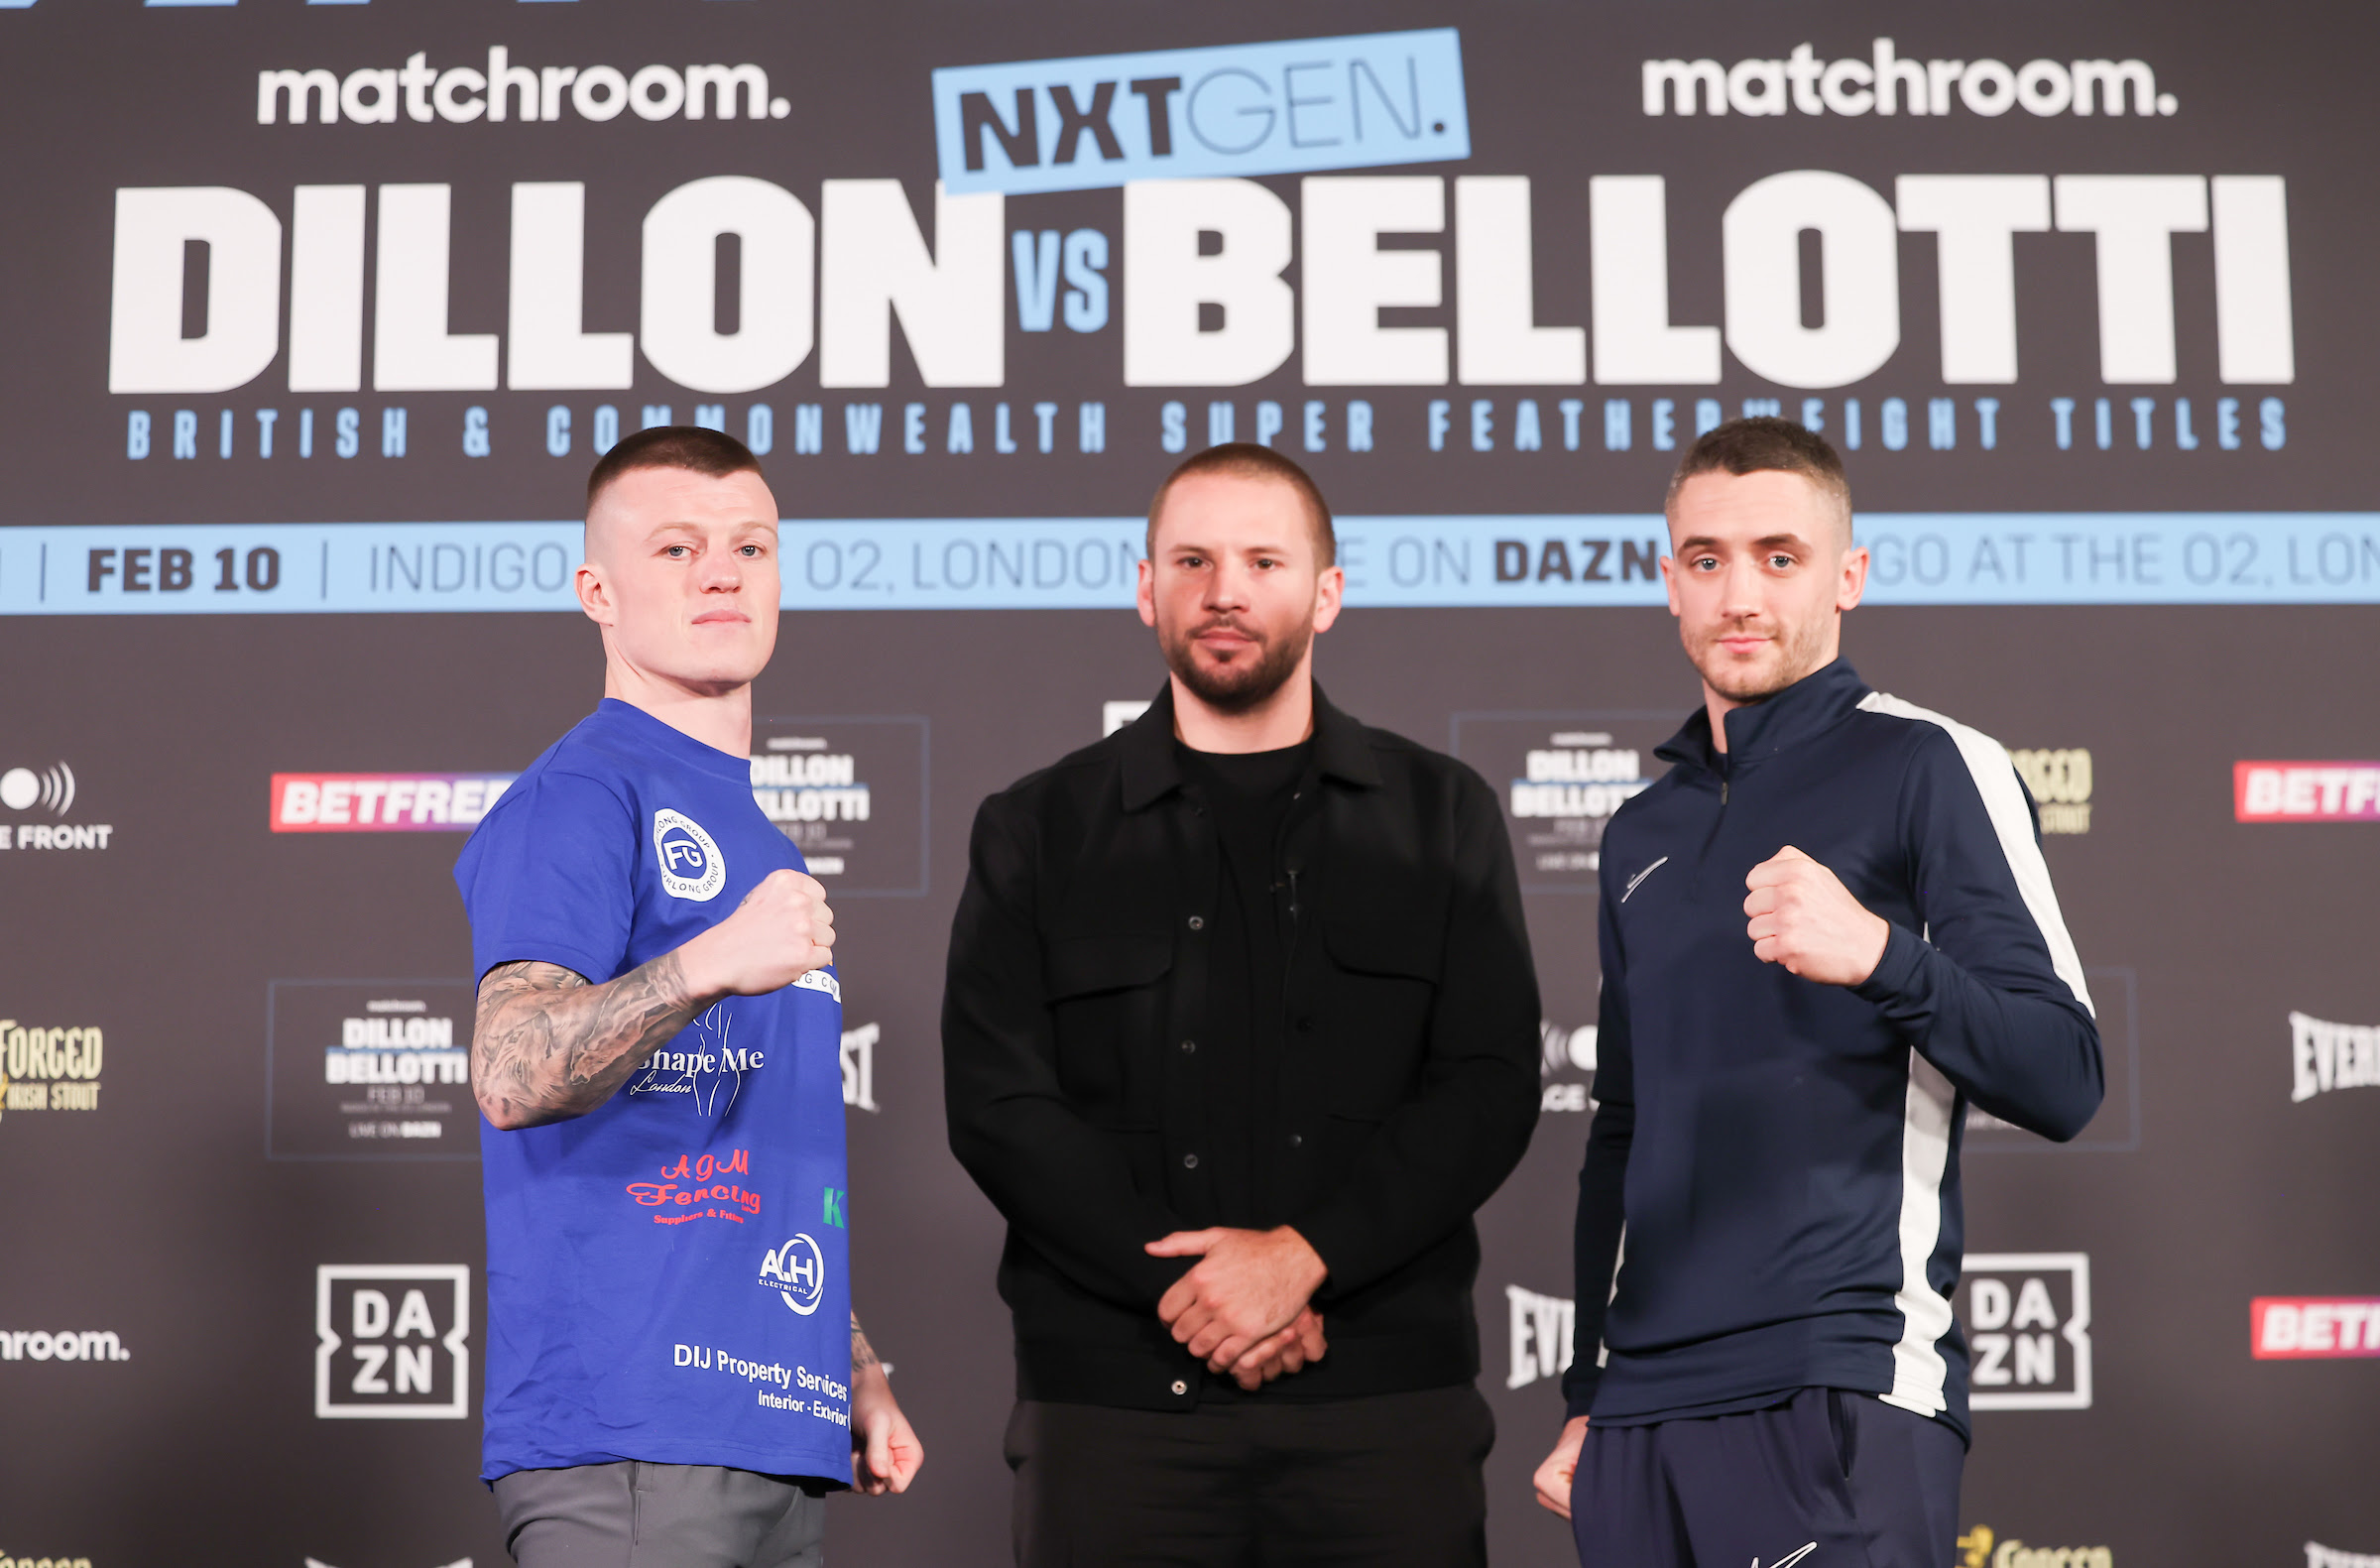 Dillon and Bellotti meet at final press conference ahead of British and Commonwealth title fight